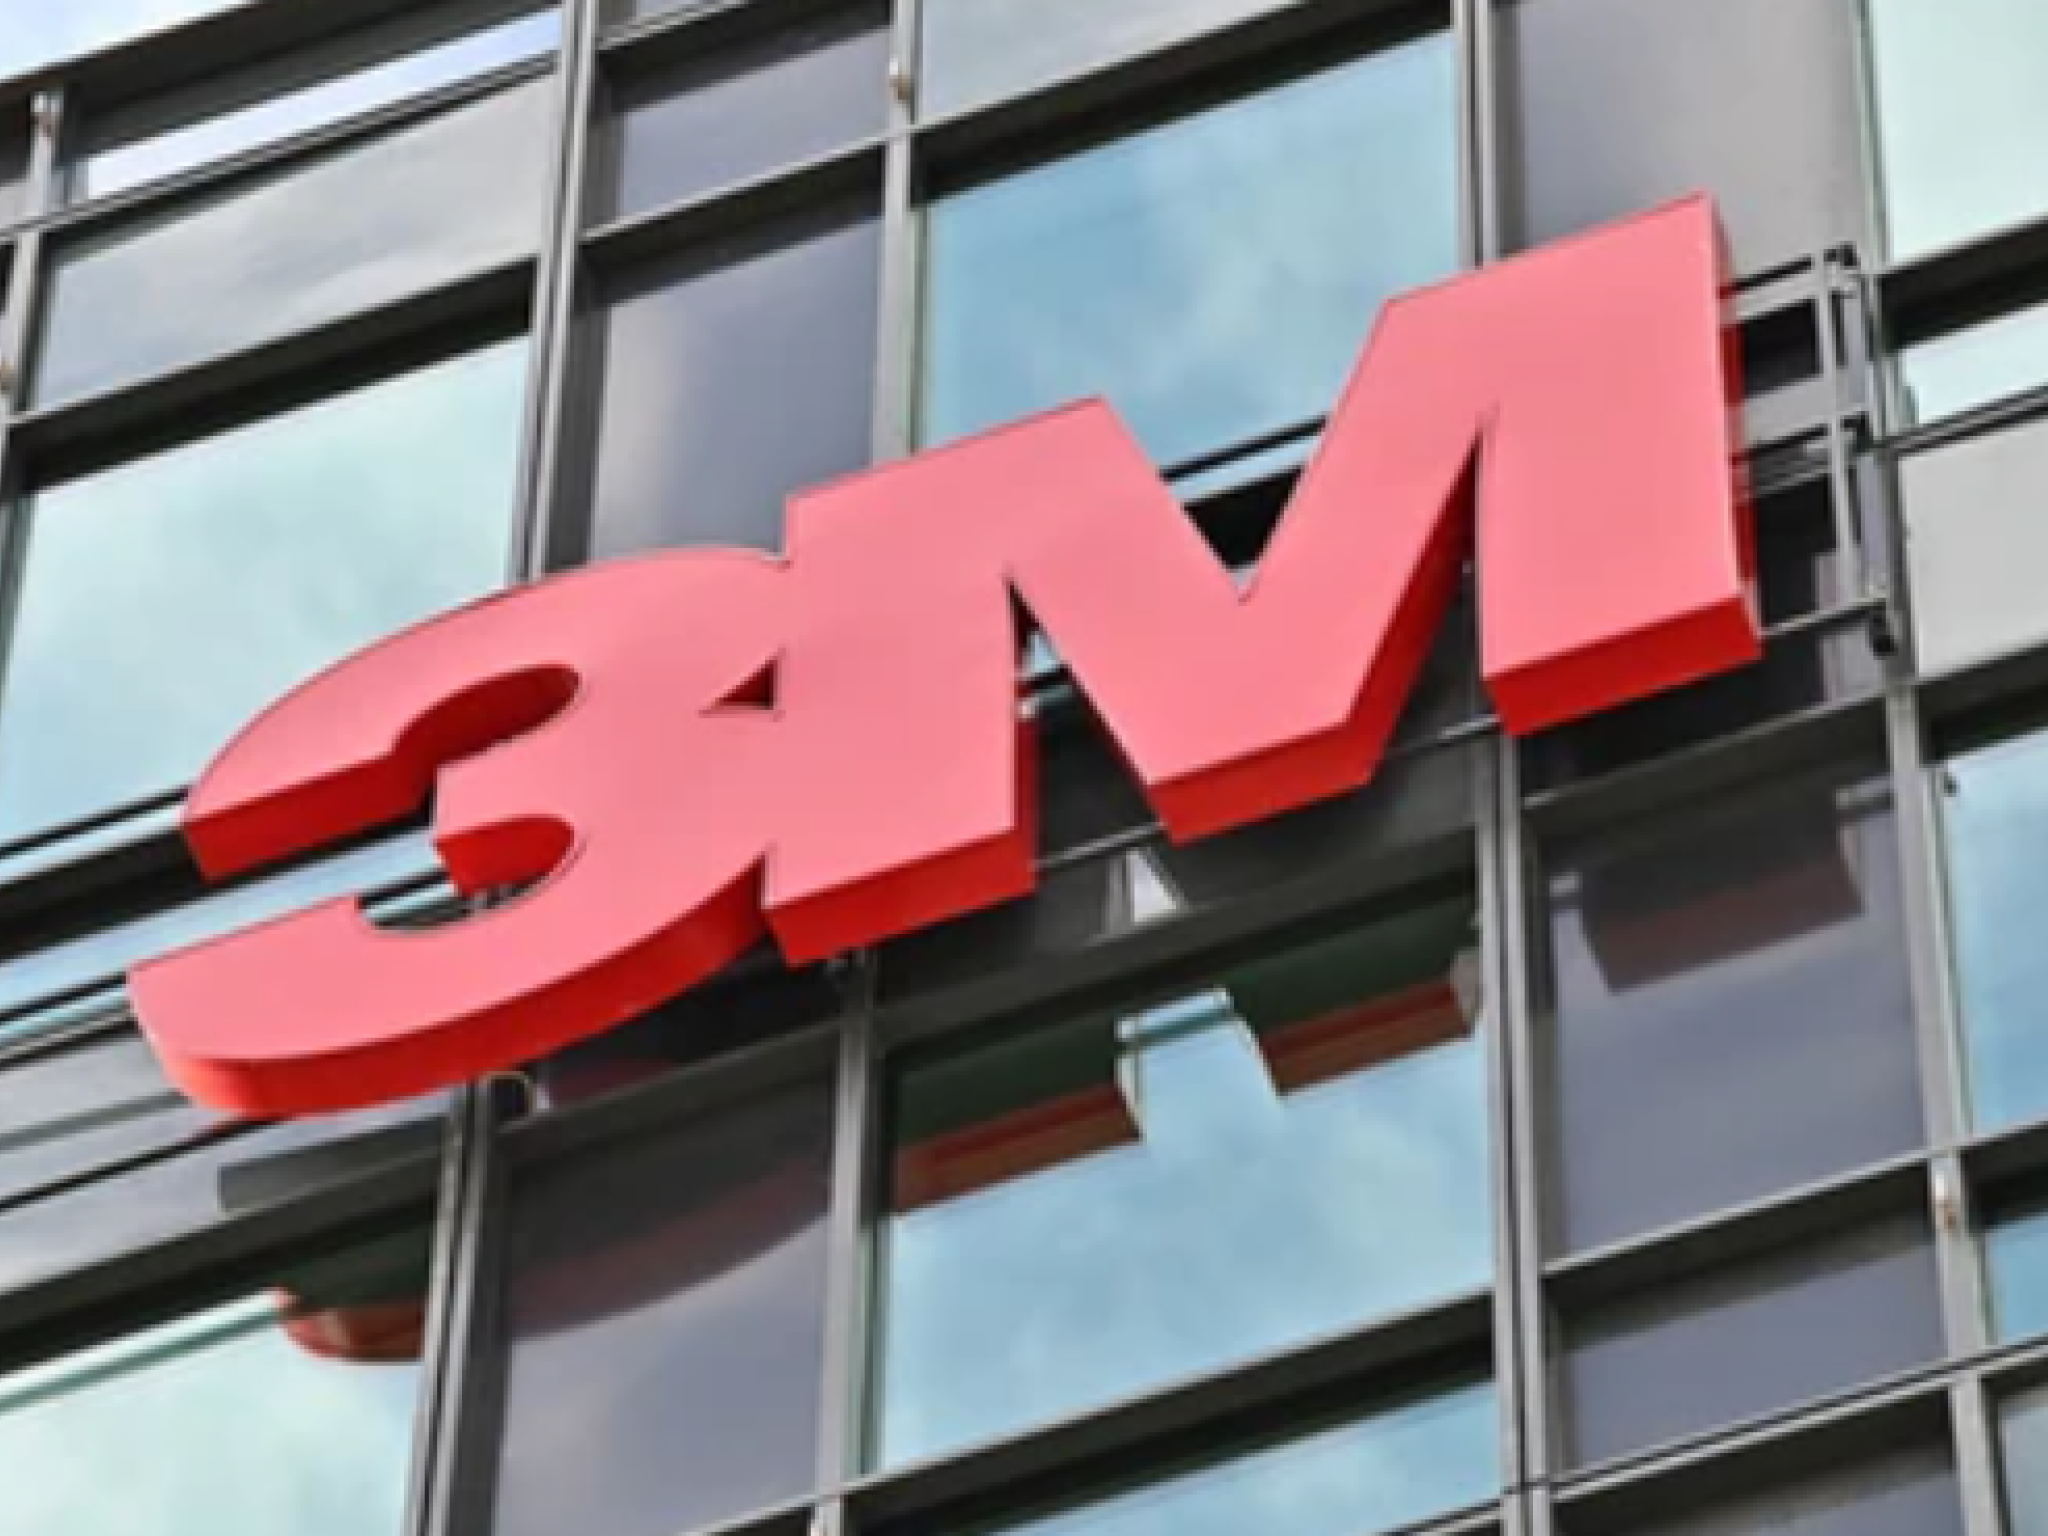  3m-analyst-moves-to-outperform-on-strong-eps-outlook 